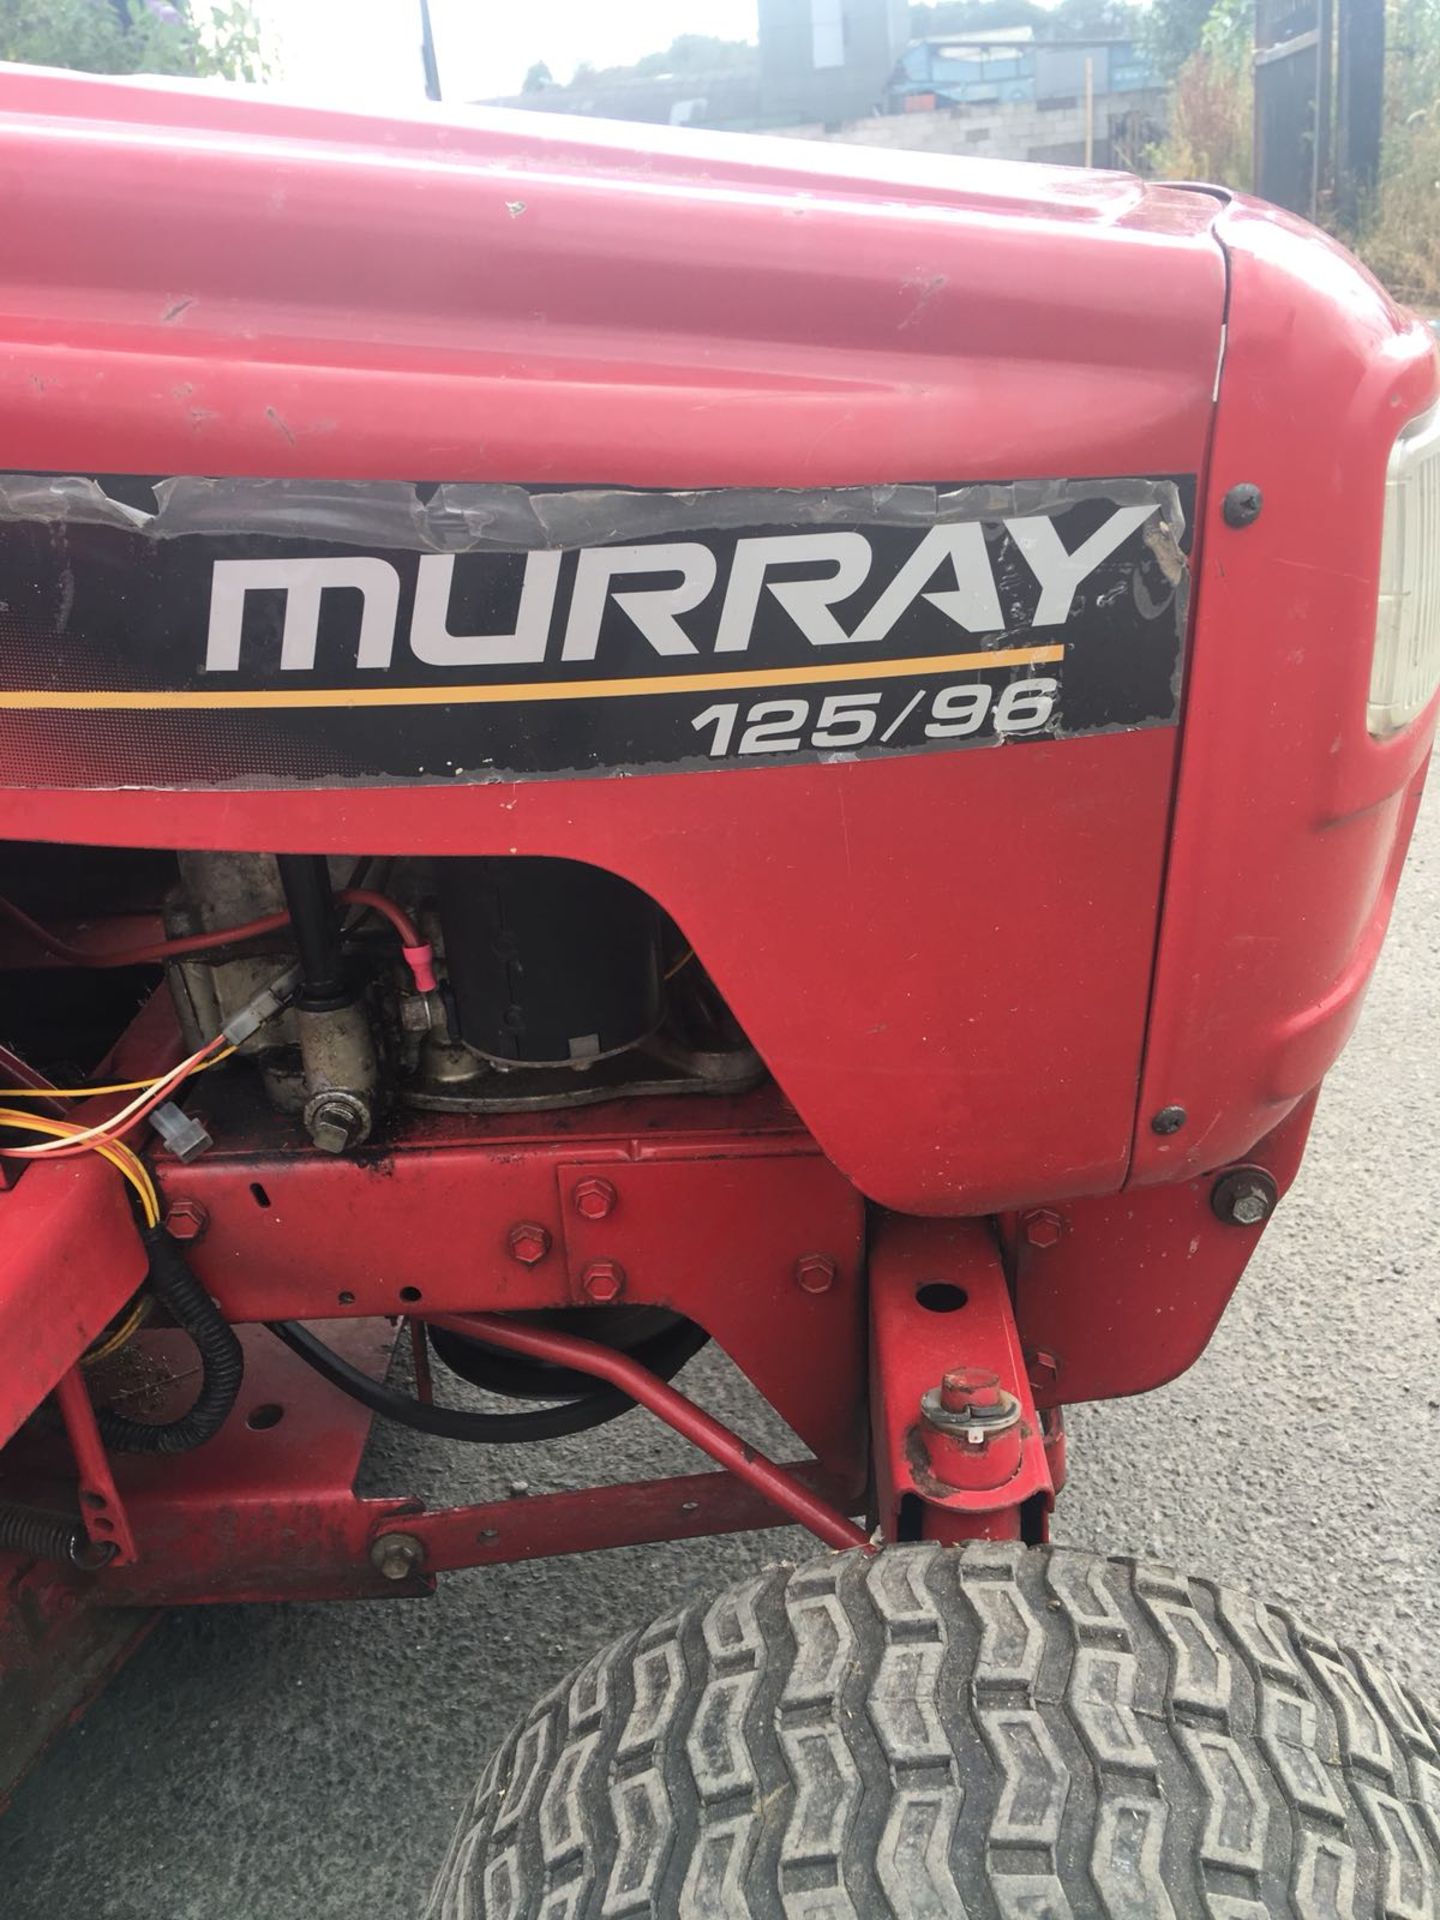 1998 MURRAY 125/96 RIDE ON LAWN MOWER *NO VAT* - Image 5 of 7